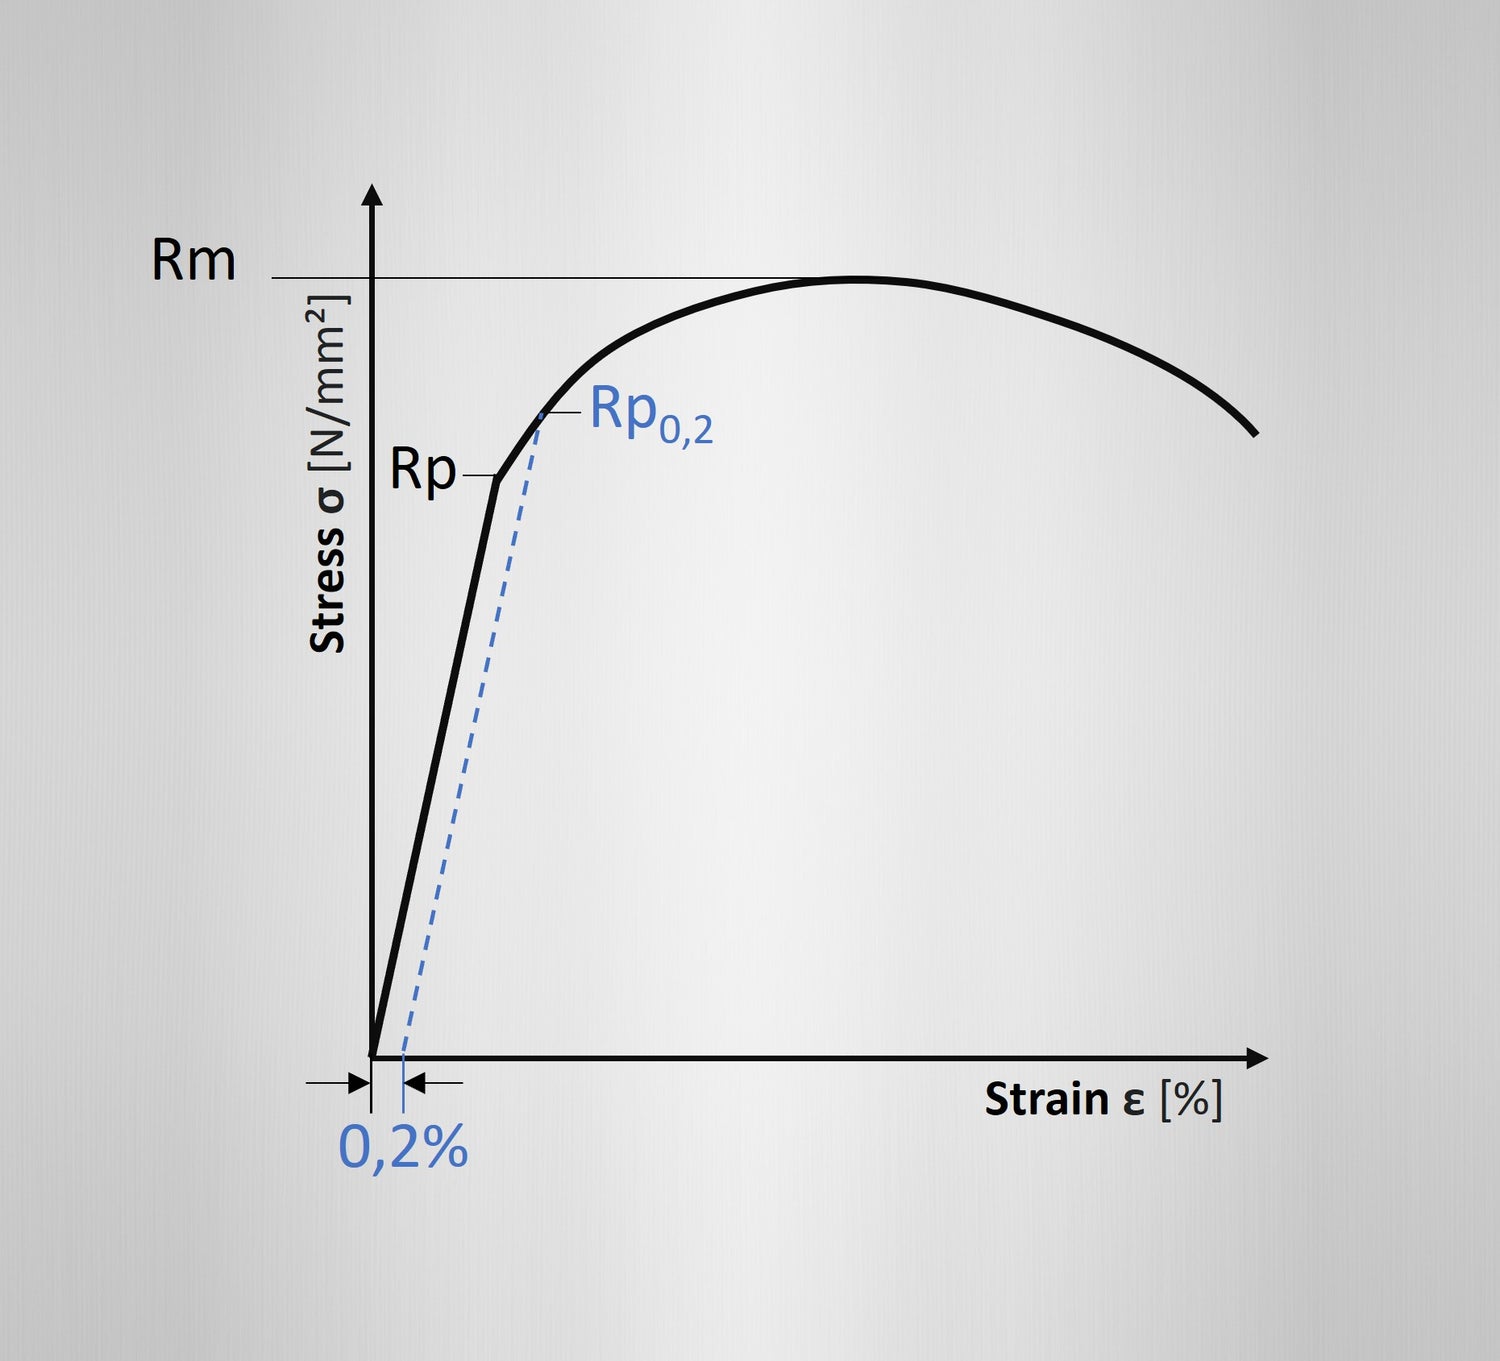 Stress-strain diagram with an explanation of the yield strength Rp0.2